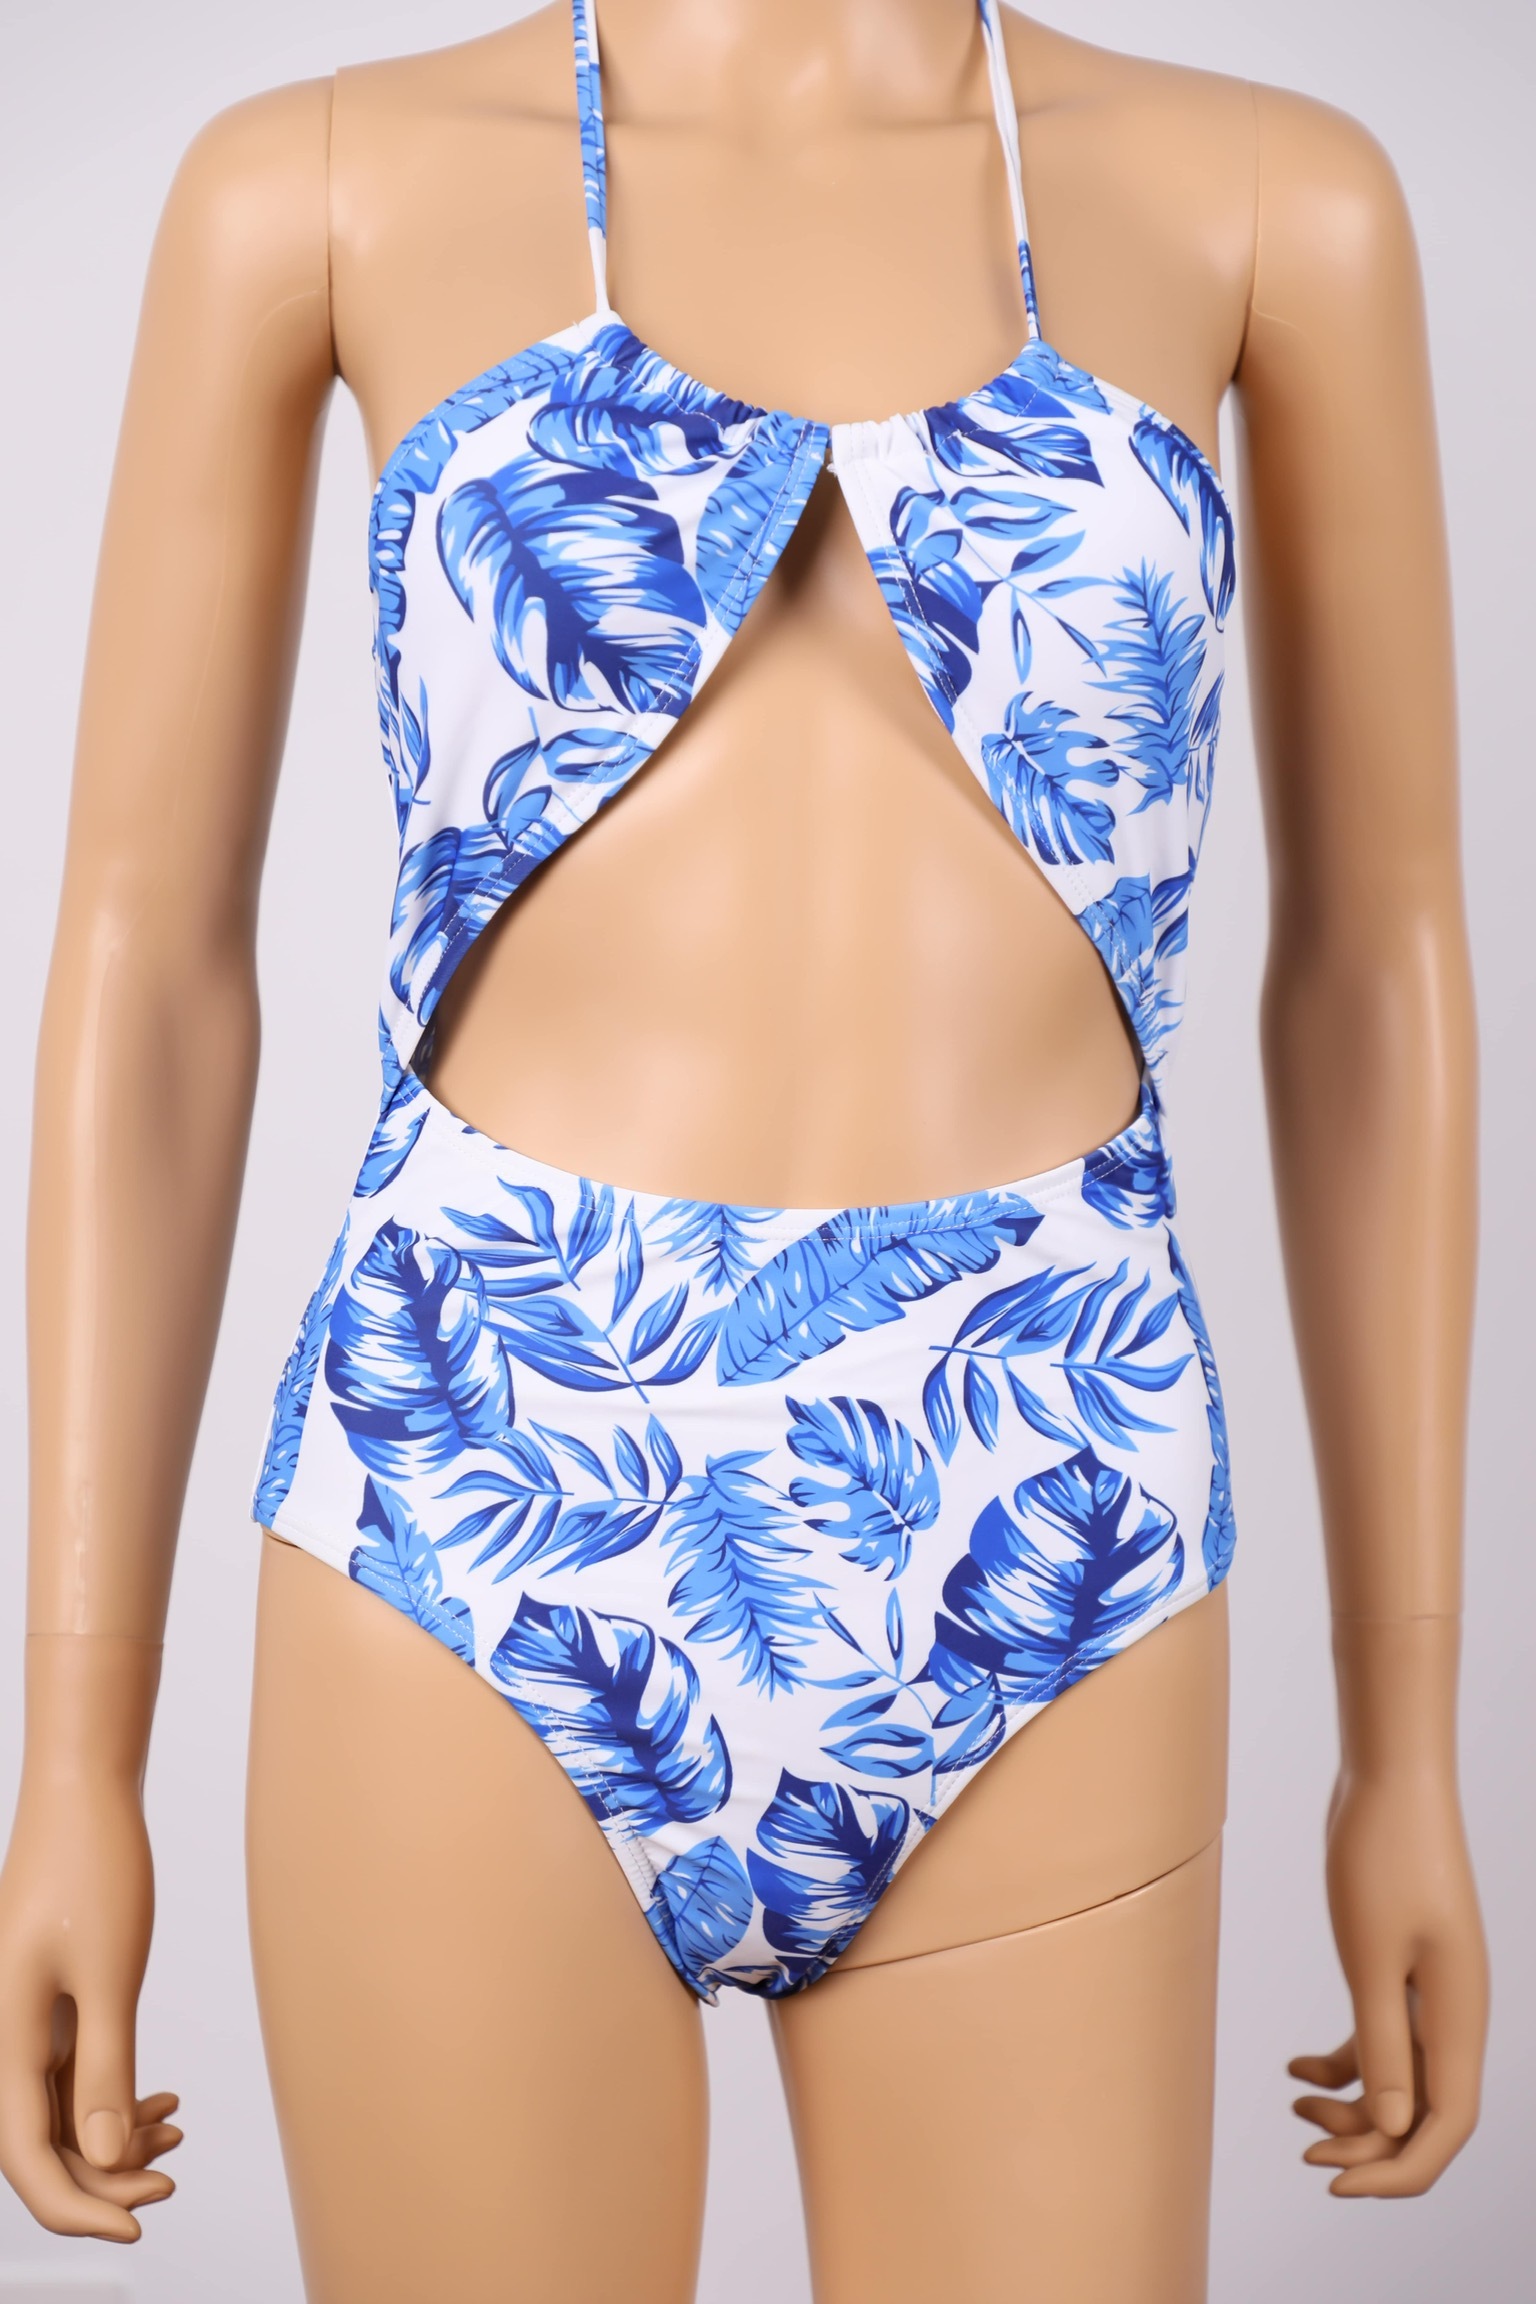 Pick Very Special Swimsuit For Next Summer